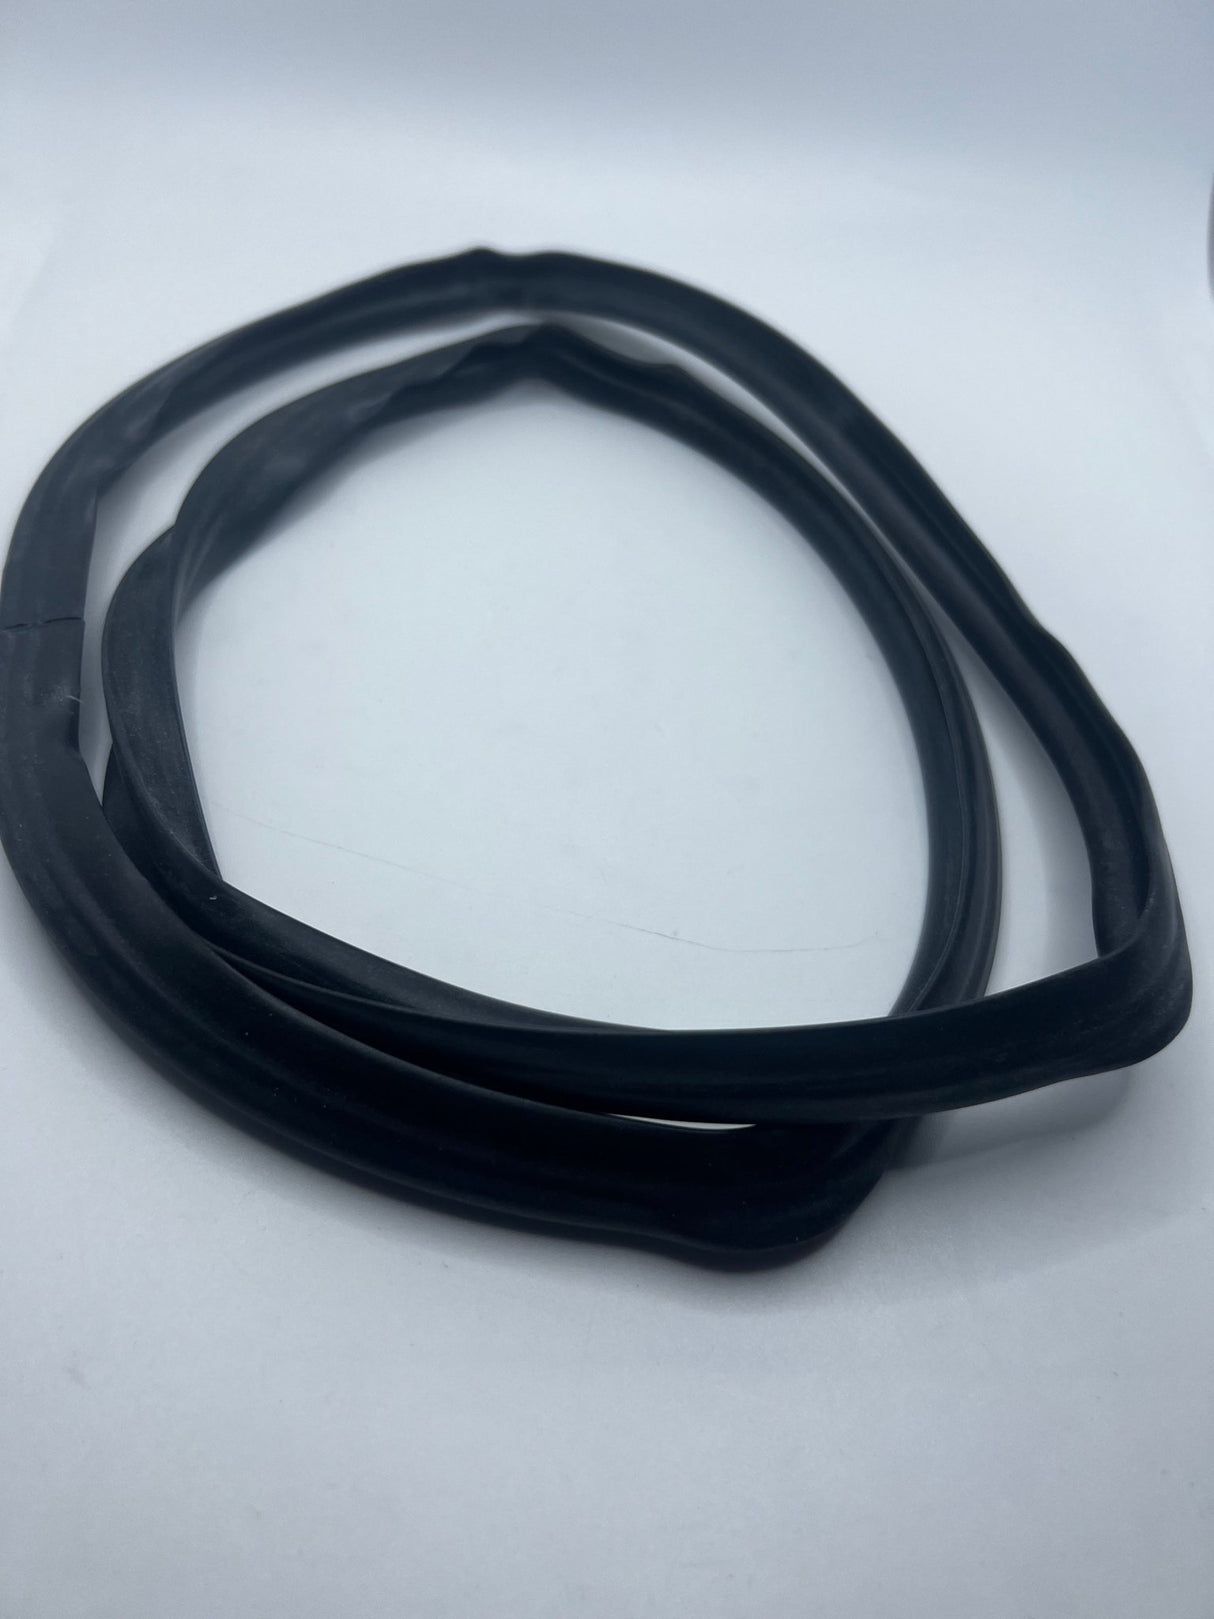 Ilve 4 sided 4 Pin Door Seal Gasket A/094/72 - My Oven Spares-Ilve-A/094/72-4